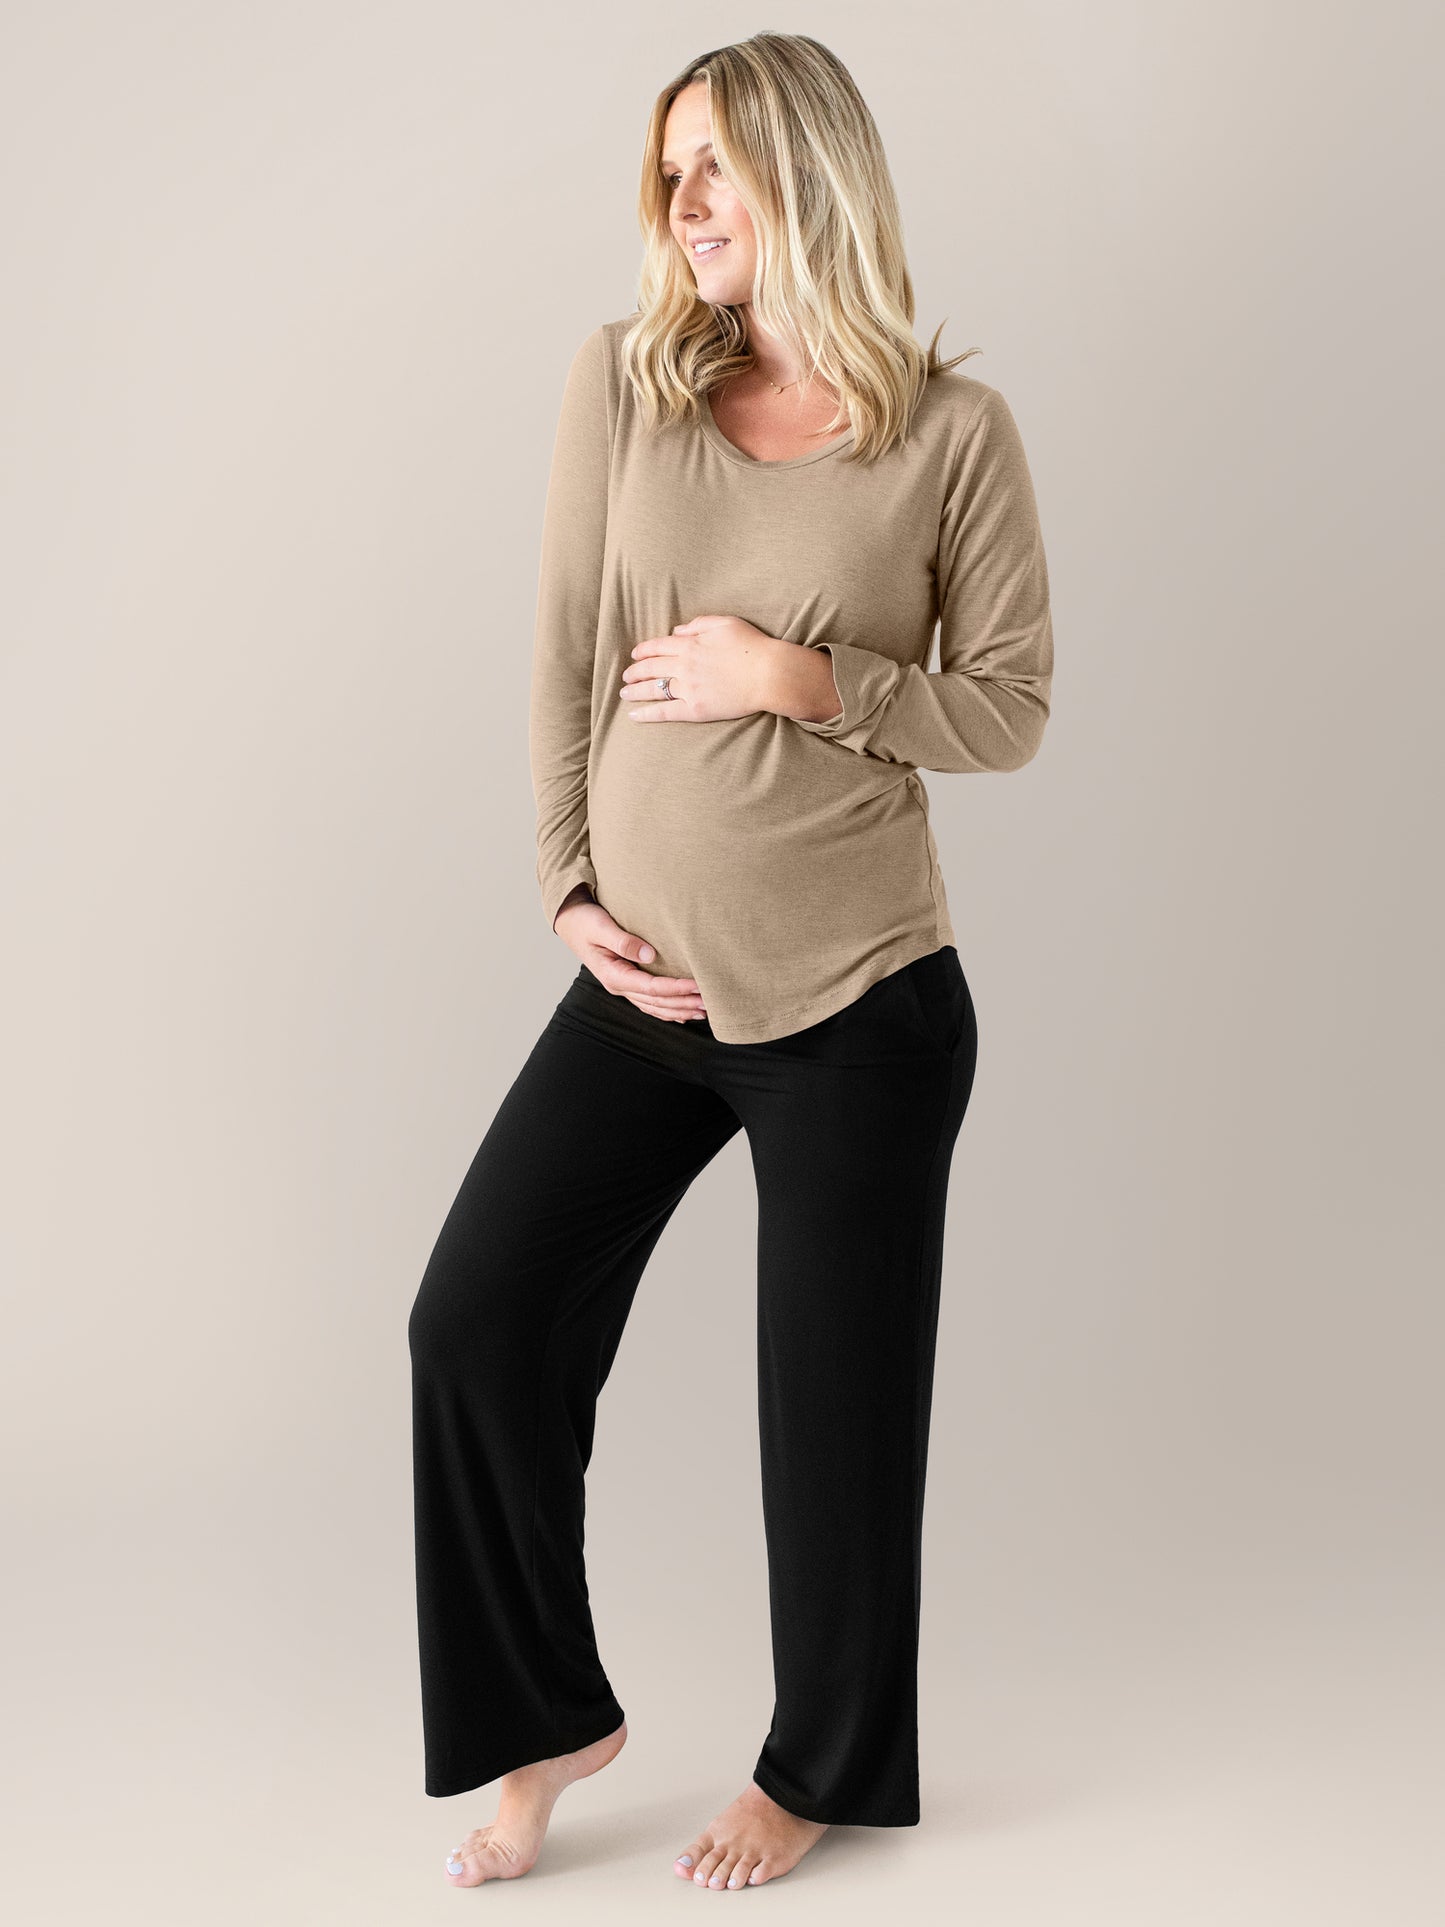 Pregnant model wearing the Bamboo Maternity & Nursing Long Sleeve T-shirt in Wheat